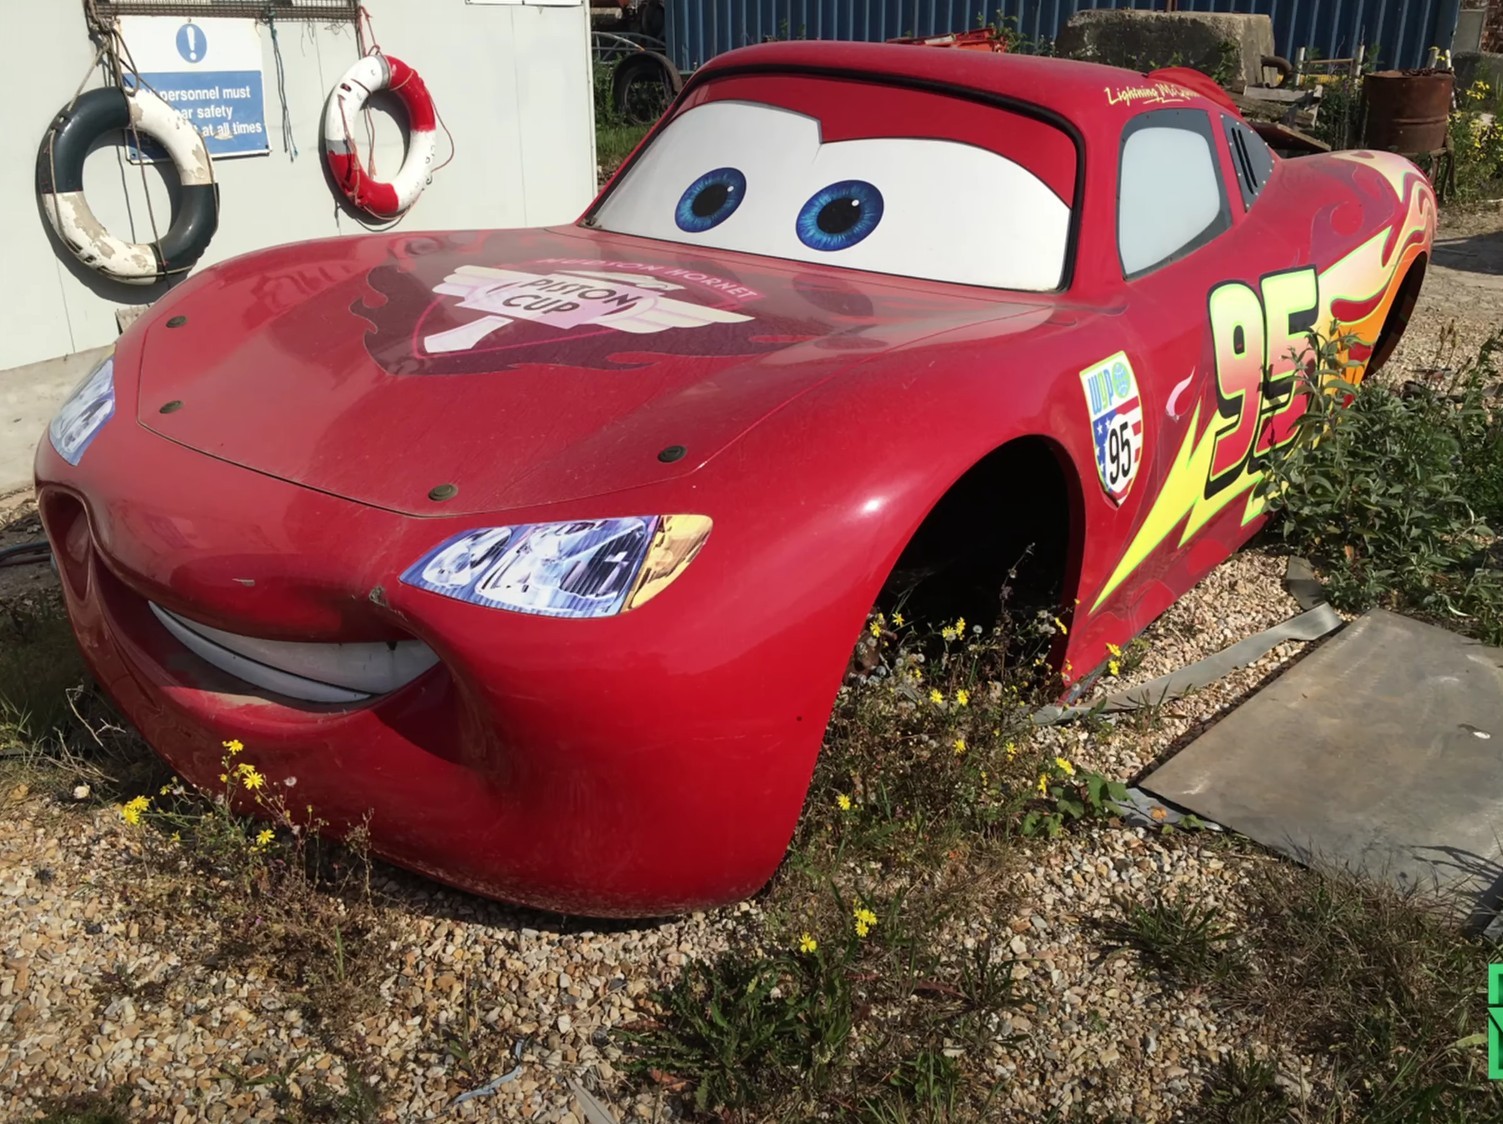 This Guy Bought The Real Lightning Mcqueen Barnfind From Cars For Just 750 3 